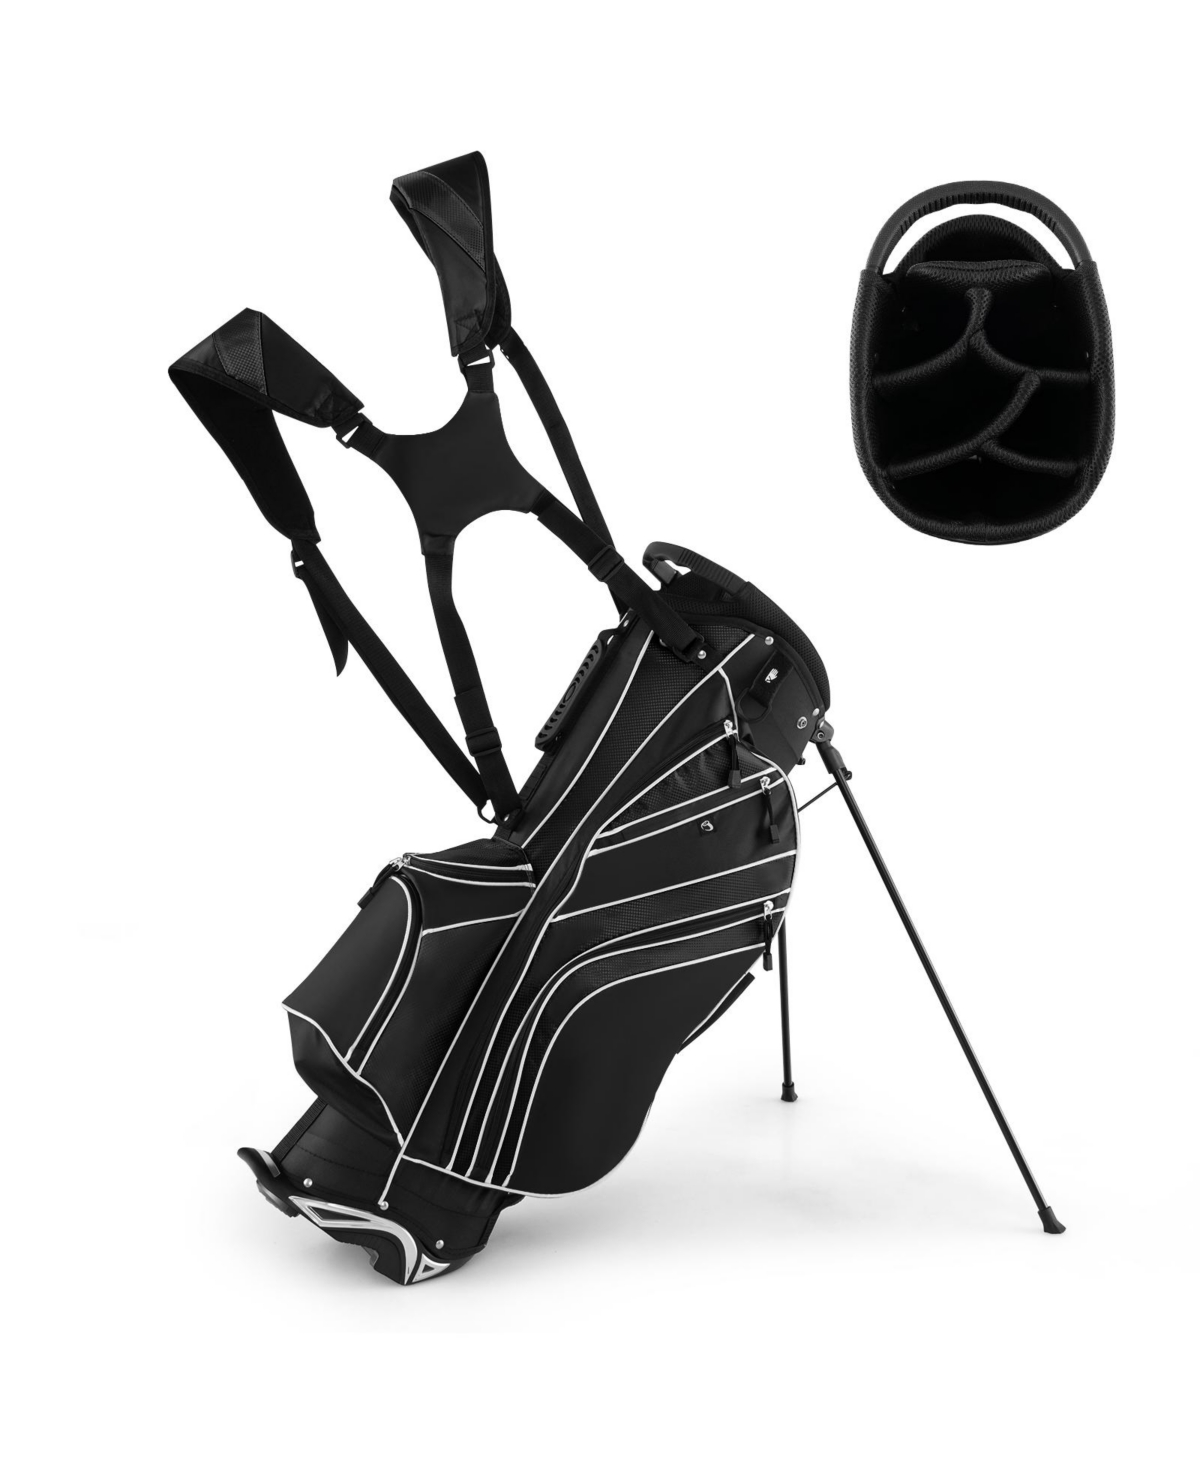 Golf Stand Cart Bag with 6-Way Divider Carry Pockets - Black